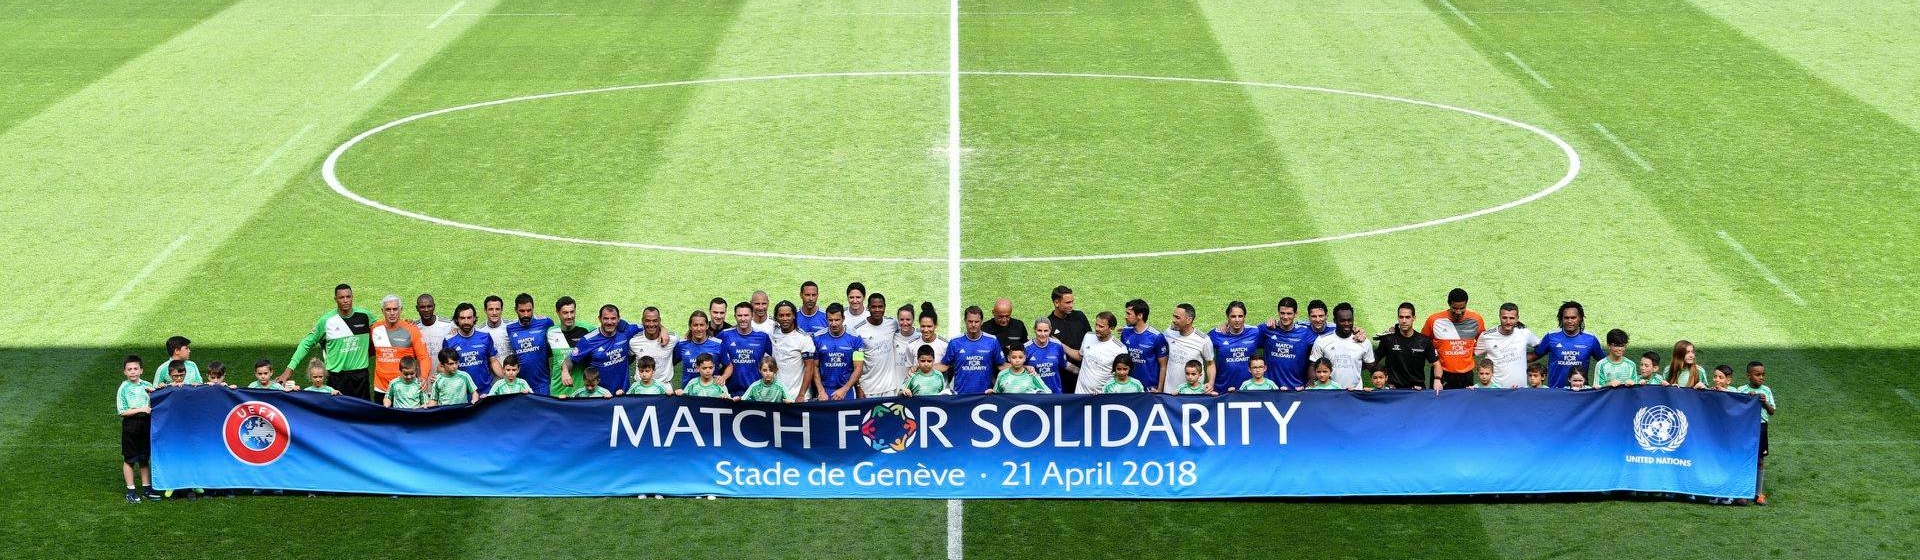 Match for Solidarity